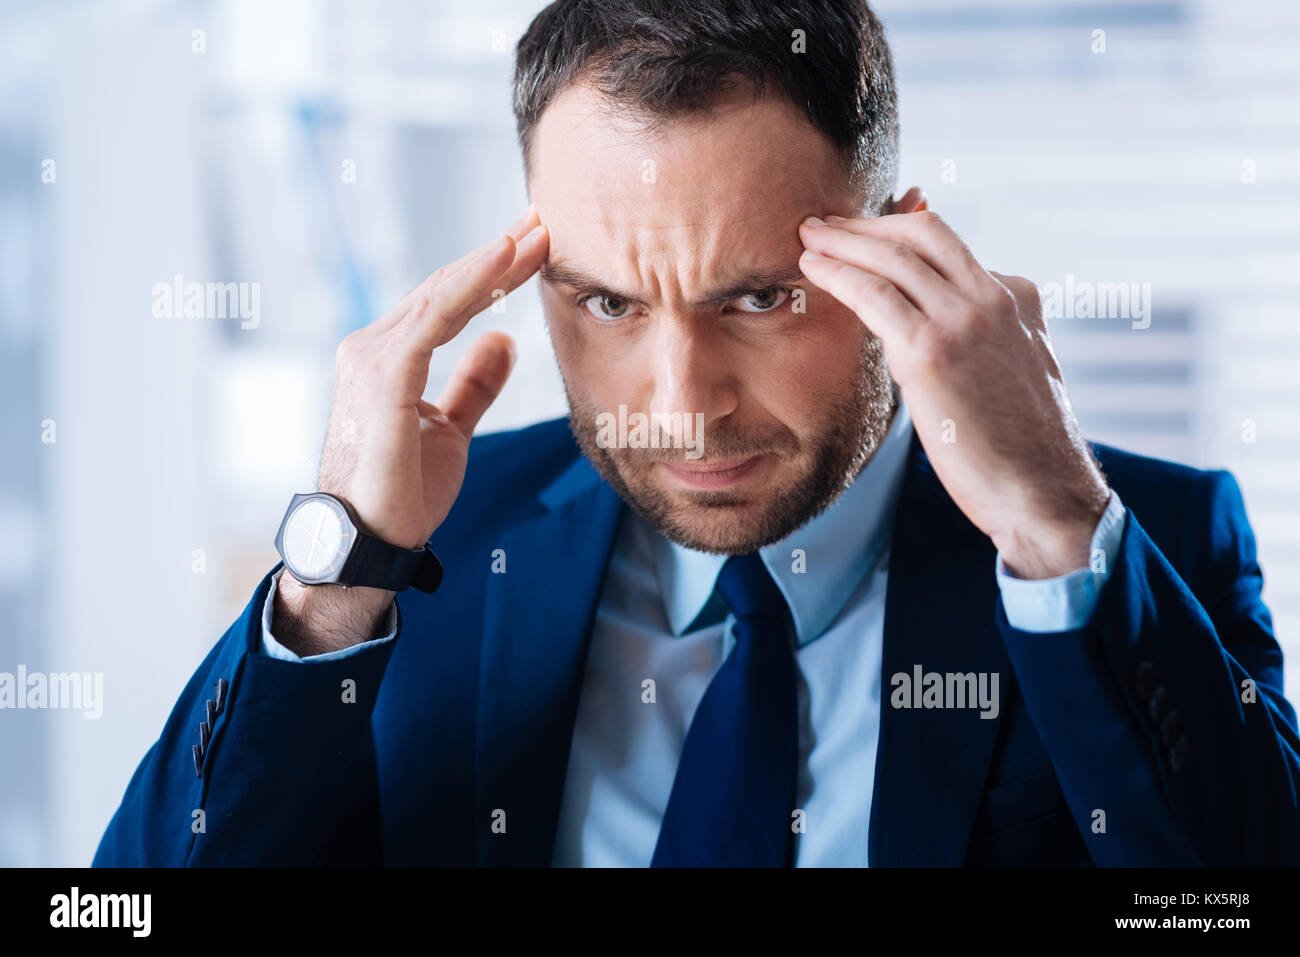 Busy hardworking man touching his head while thinking and looking concentrated Stock Photo